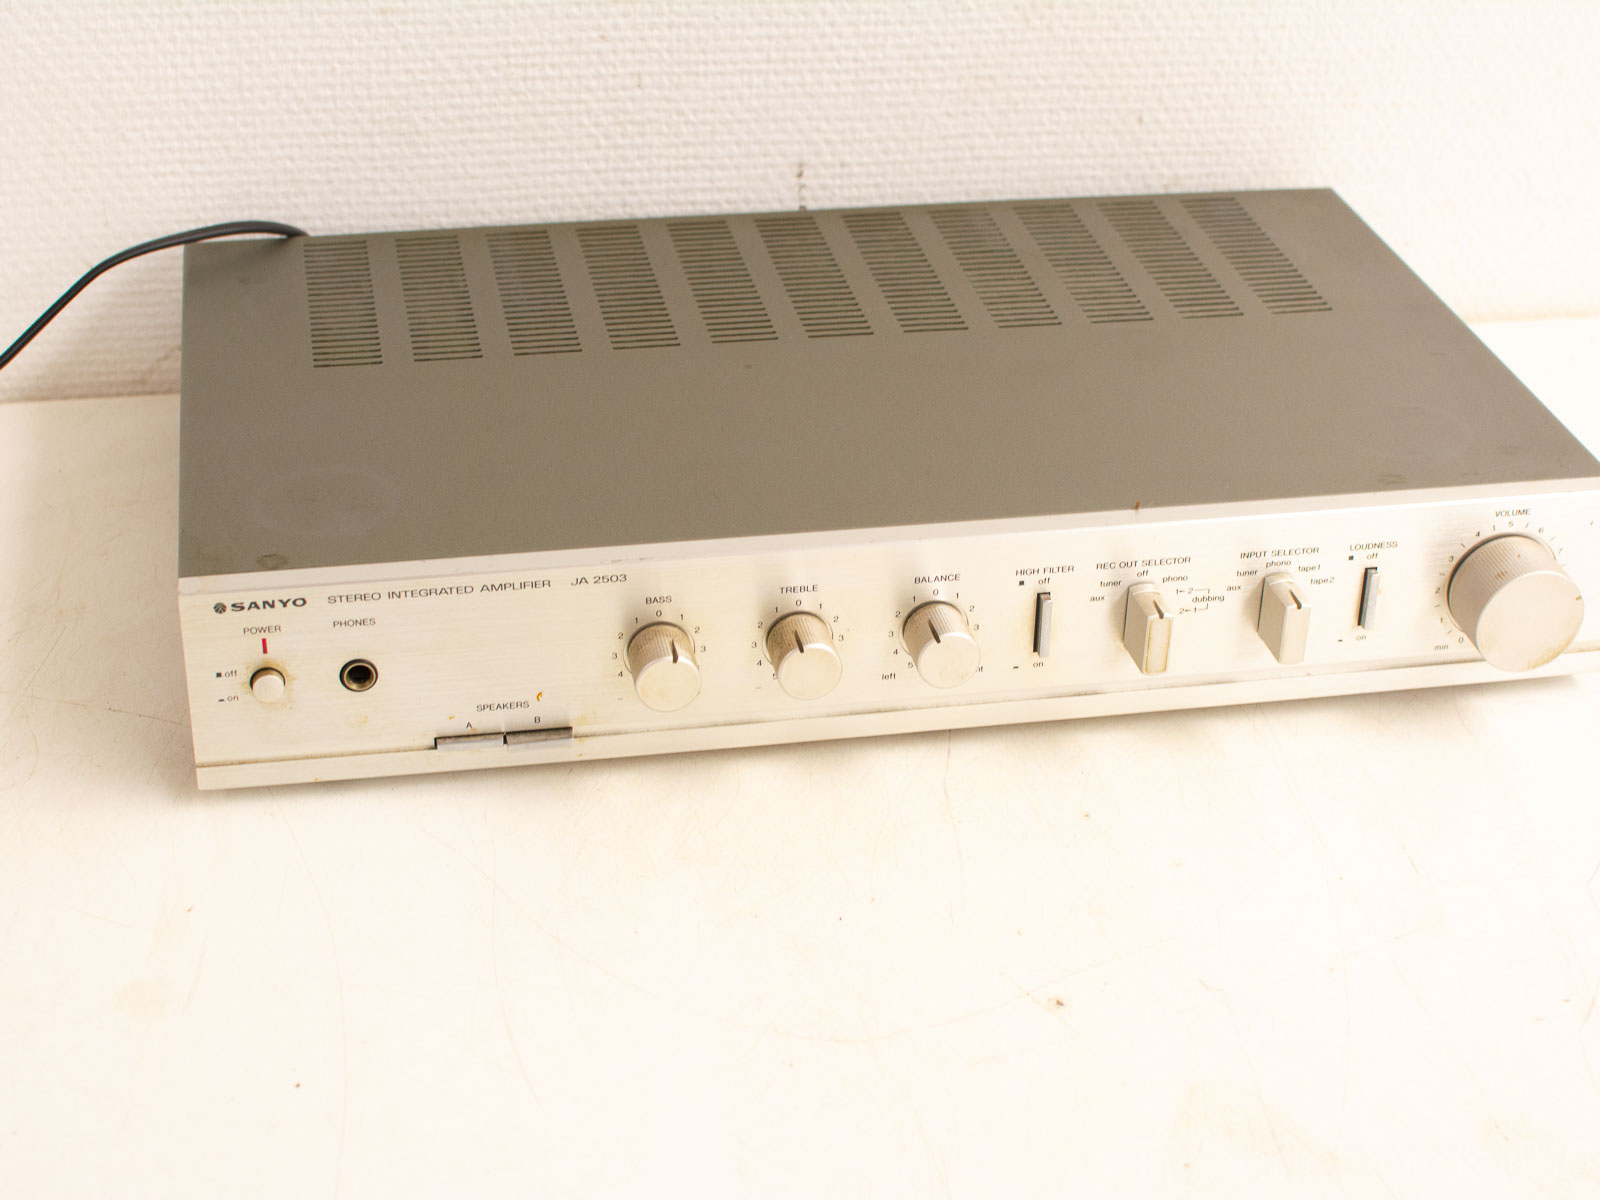 Sanyo Stereo integrated amplifier 28631